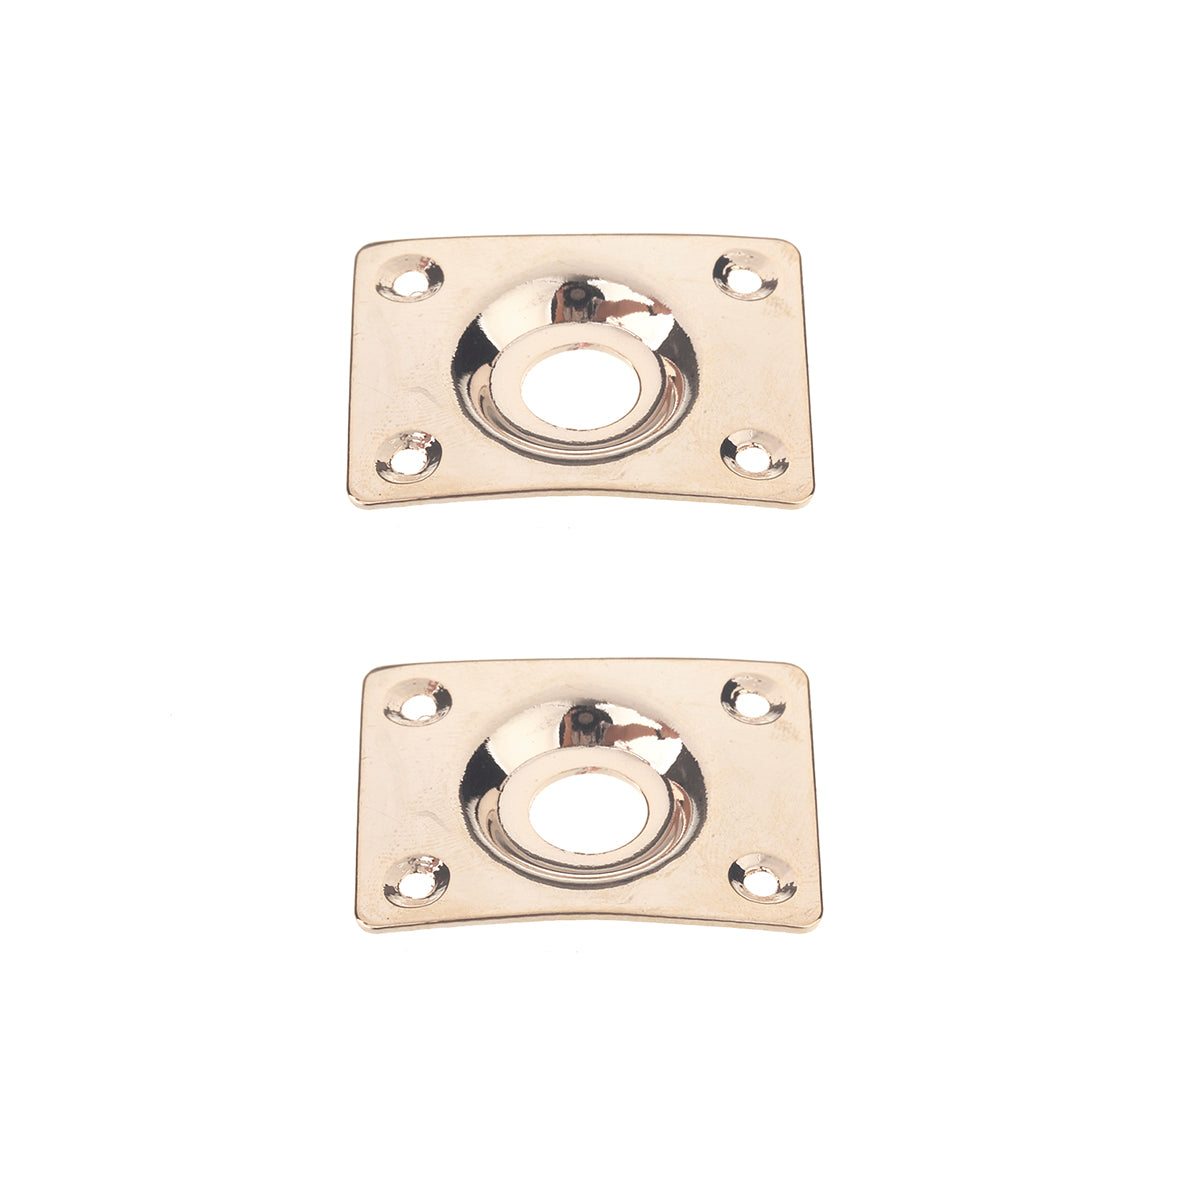 Musiclily Rectangle Guitar Jack Plate,Gold (2 Pieces)